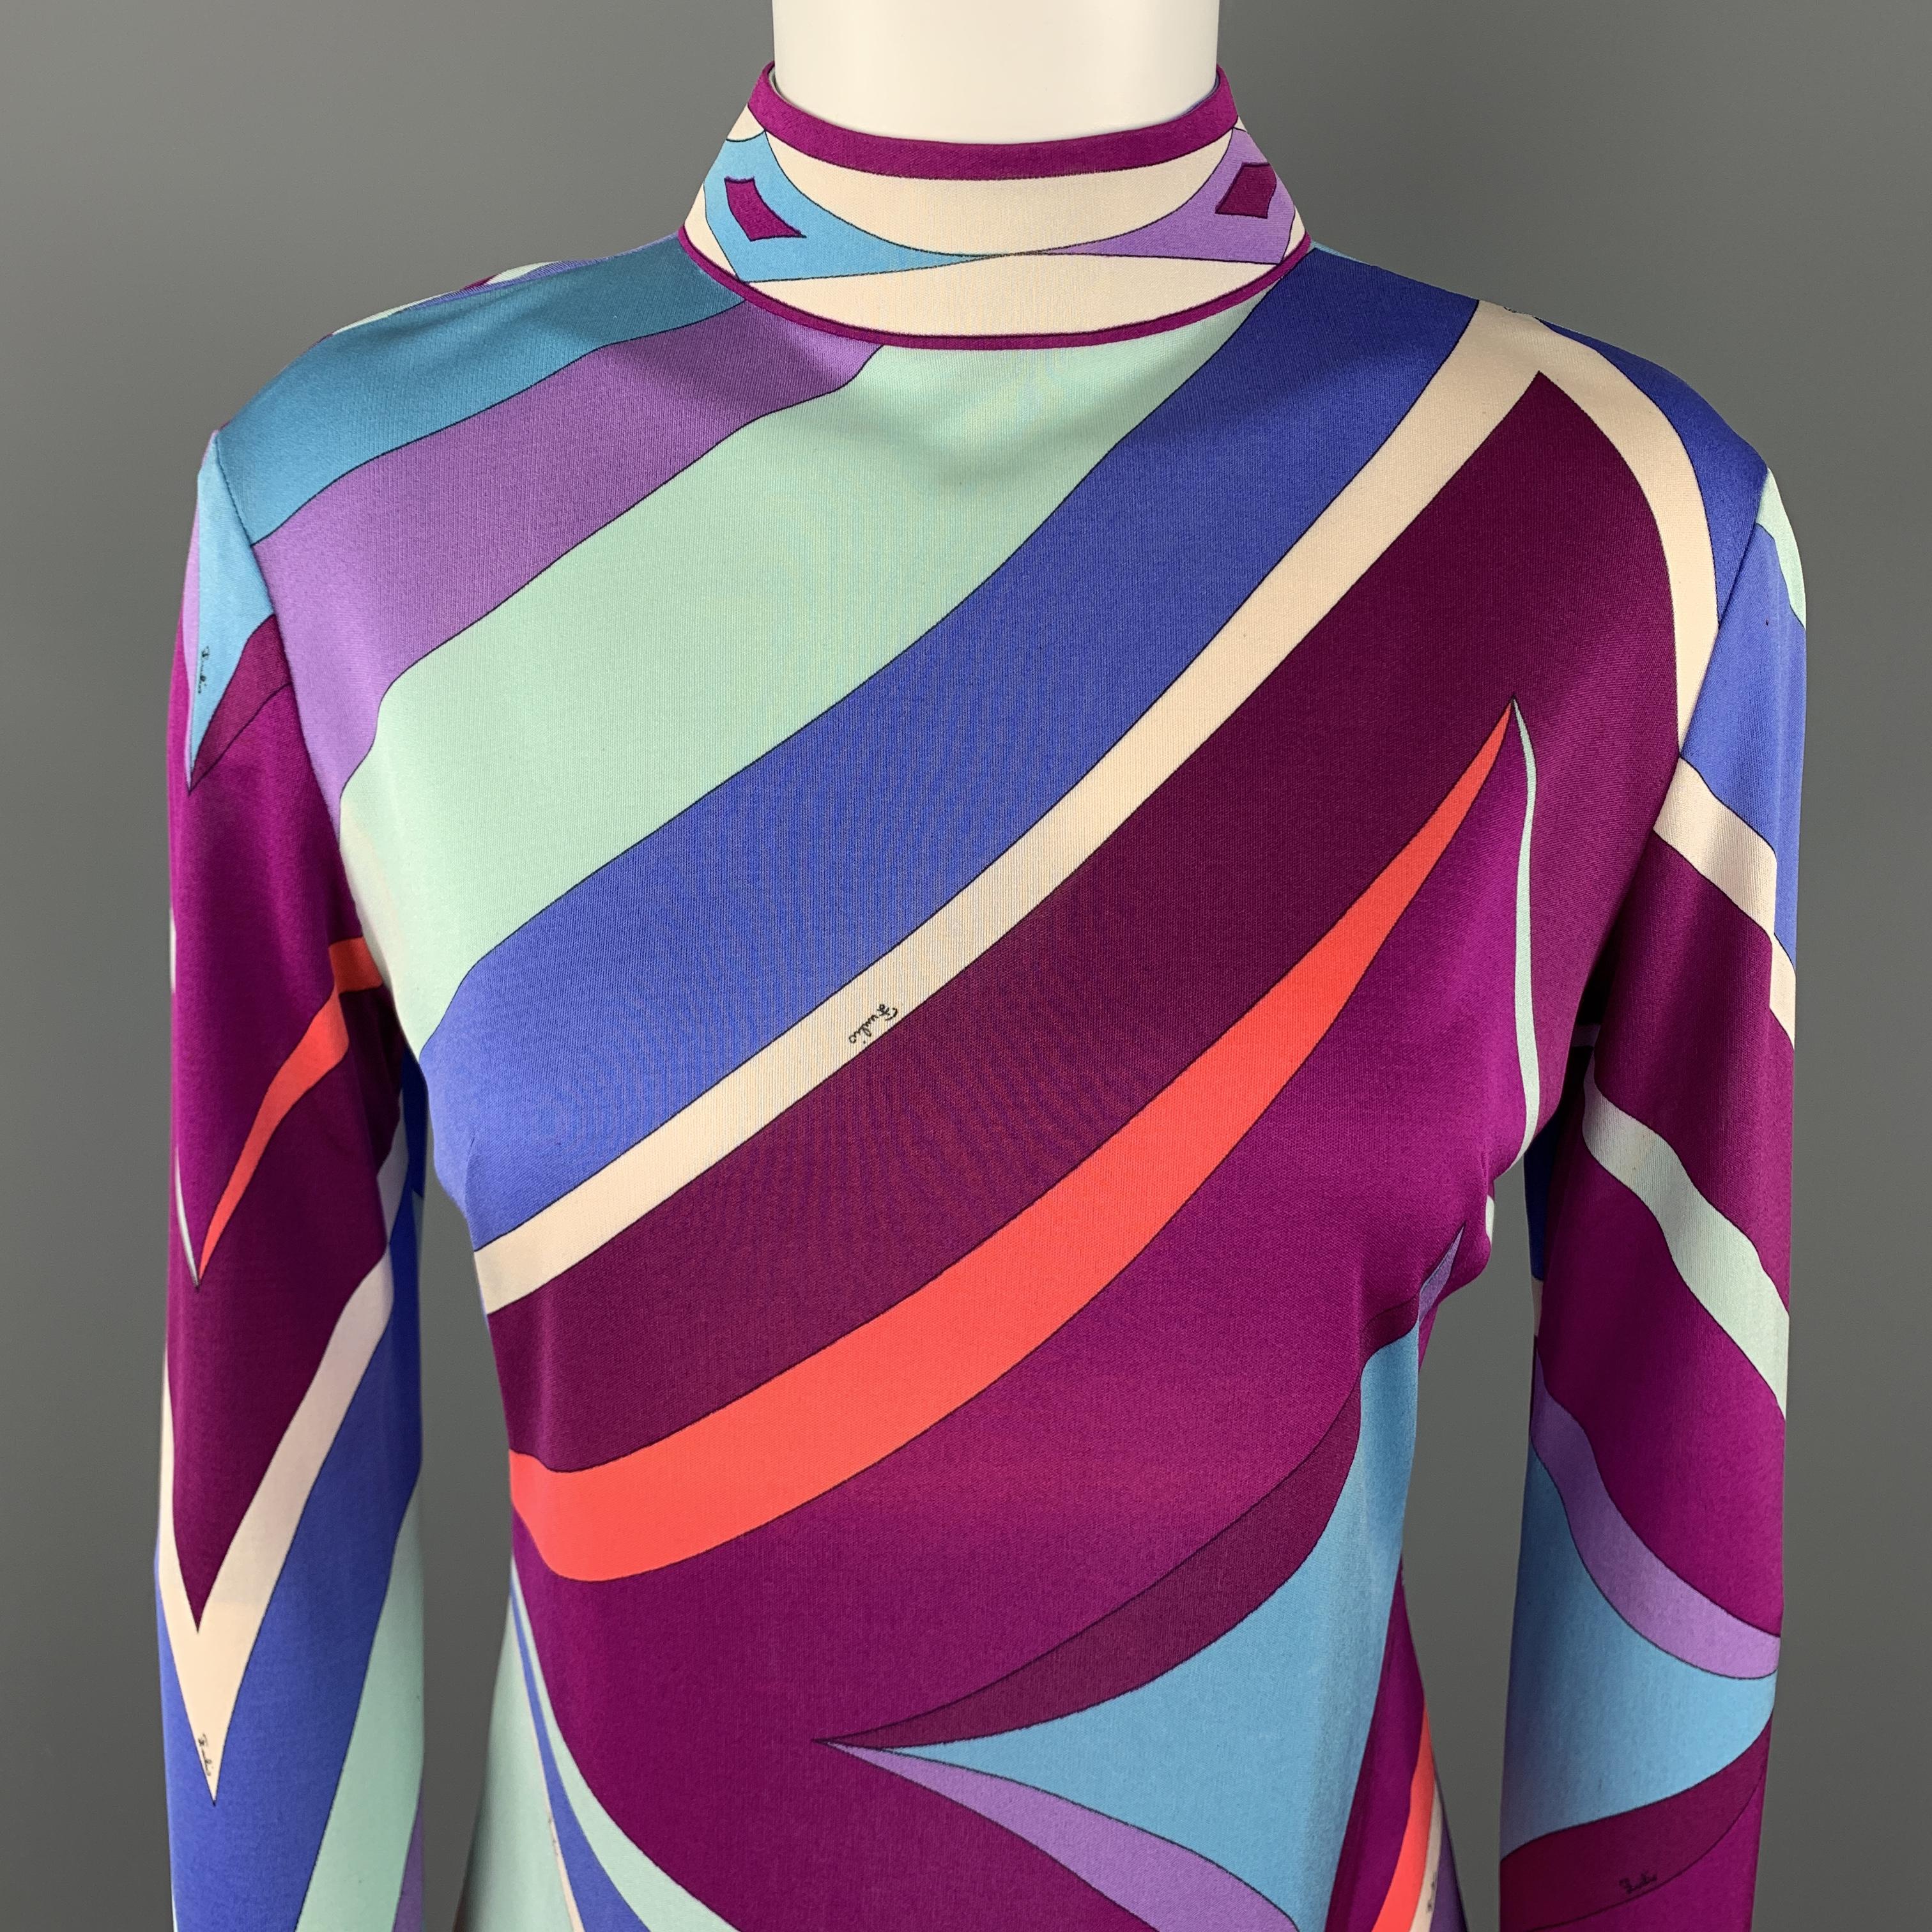 Vintage EMILIO PUCCI blouse comes in blue and purple print silk jersey with a mock neck and back zip with placket. Fading throughout. As-is. Made in Italy.

Good Pre-Owned Condition.
Marked: 10

Measurements:

Shoulder: 16.5 in,
Bust: 37 in.
Sleeve: